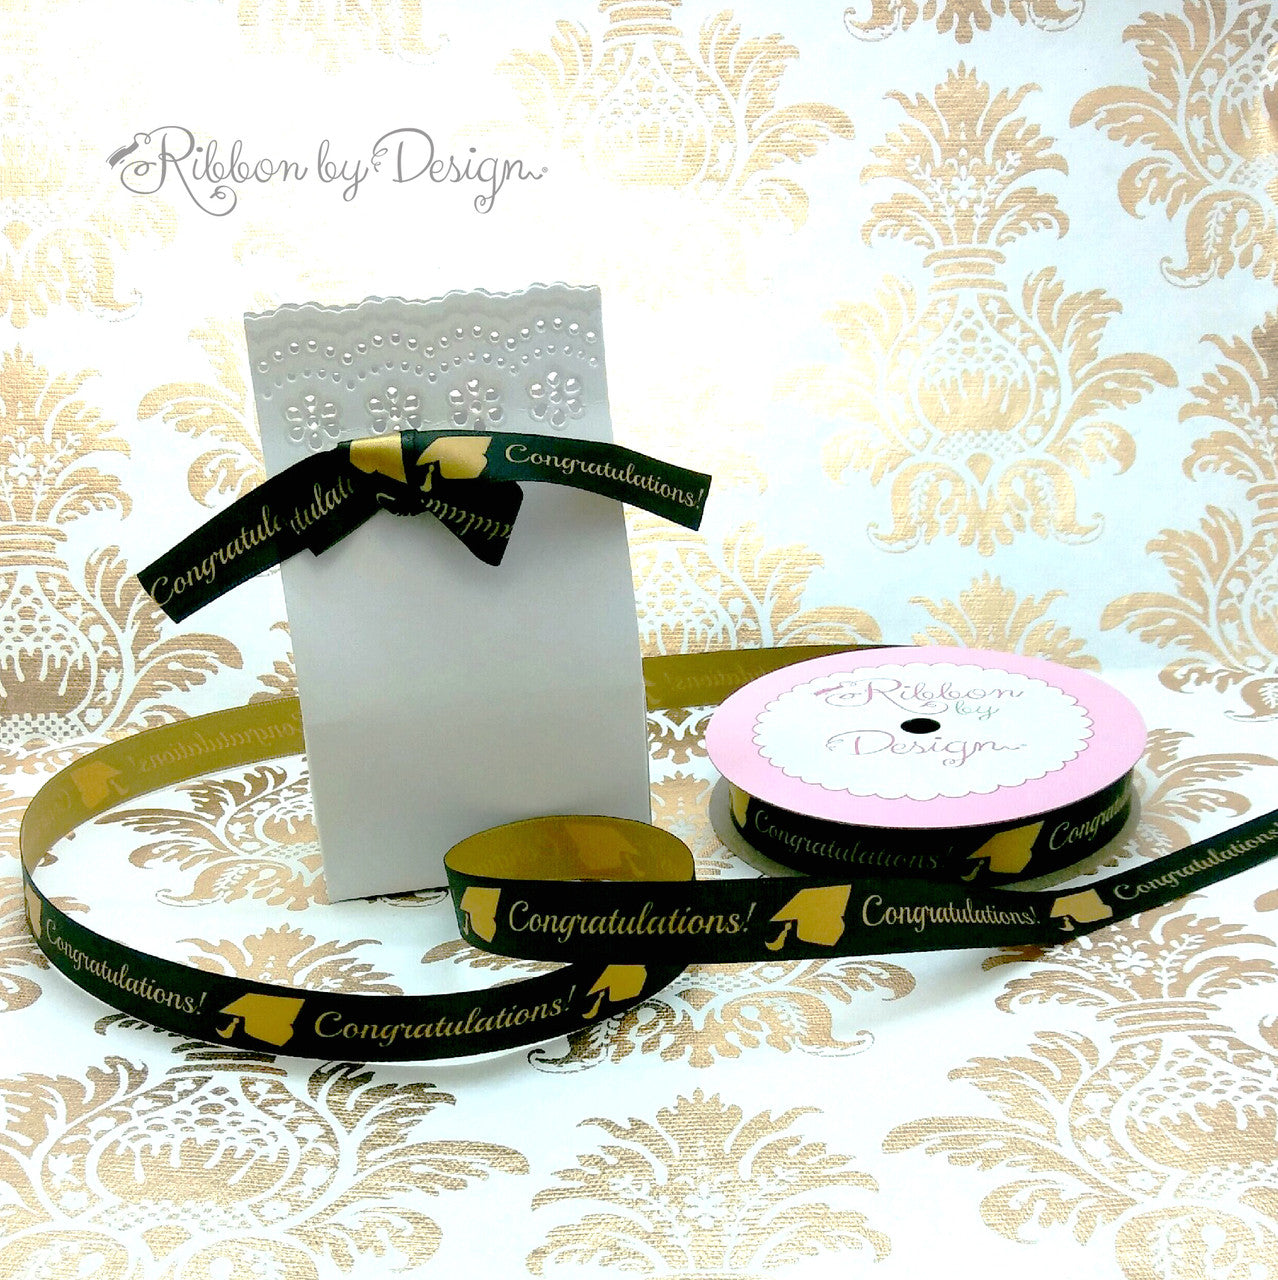 A simple gift with our black and gold ribbon makes a wonderful presentation to the recipient!